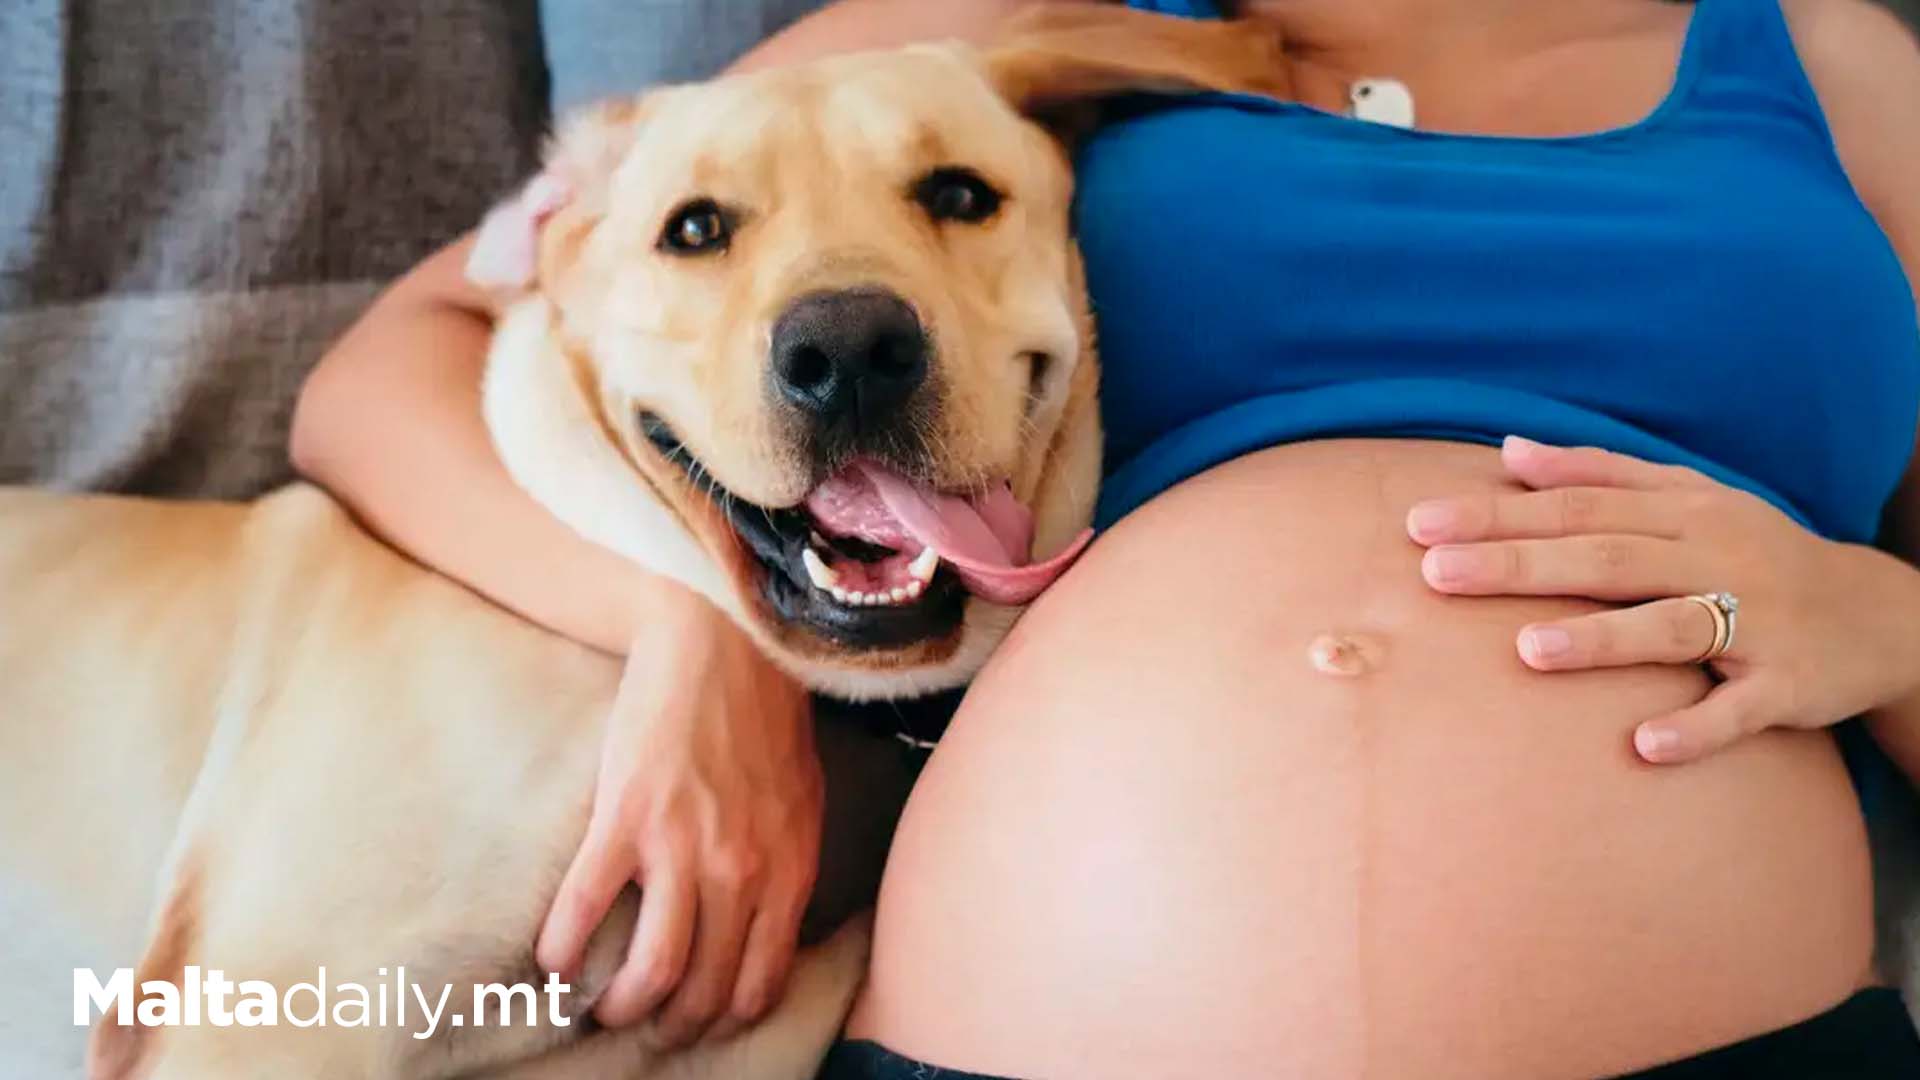 Dogs Are Able To Sense When Human Owners Are Pregnant